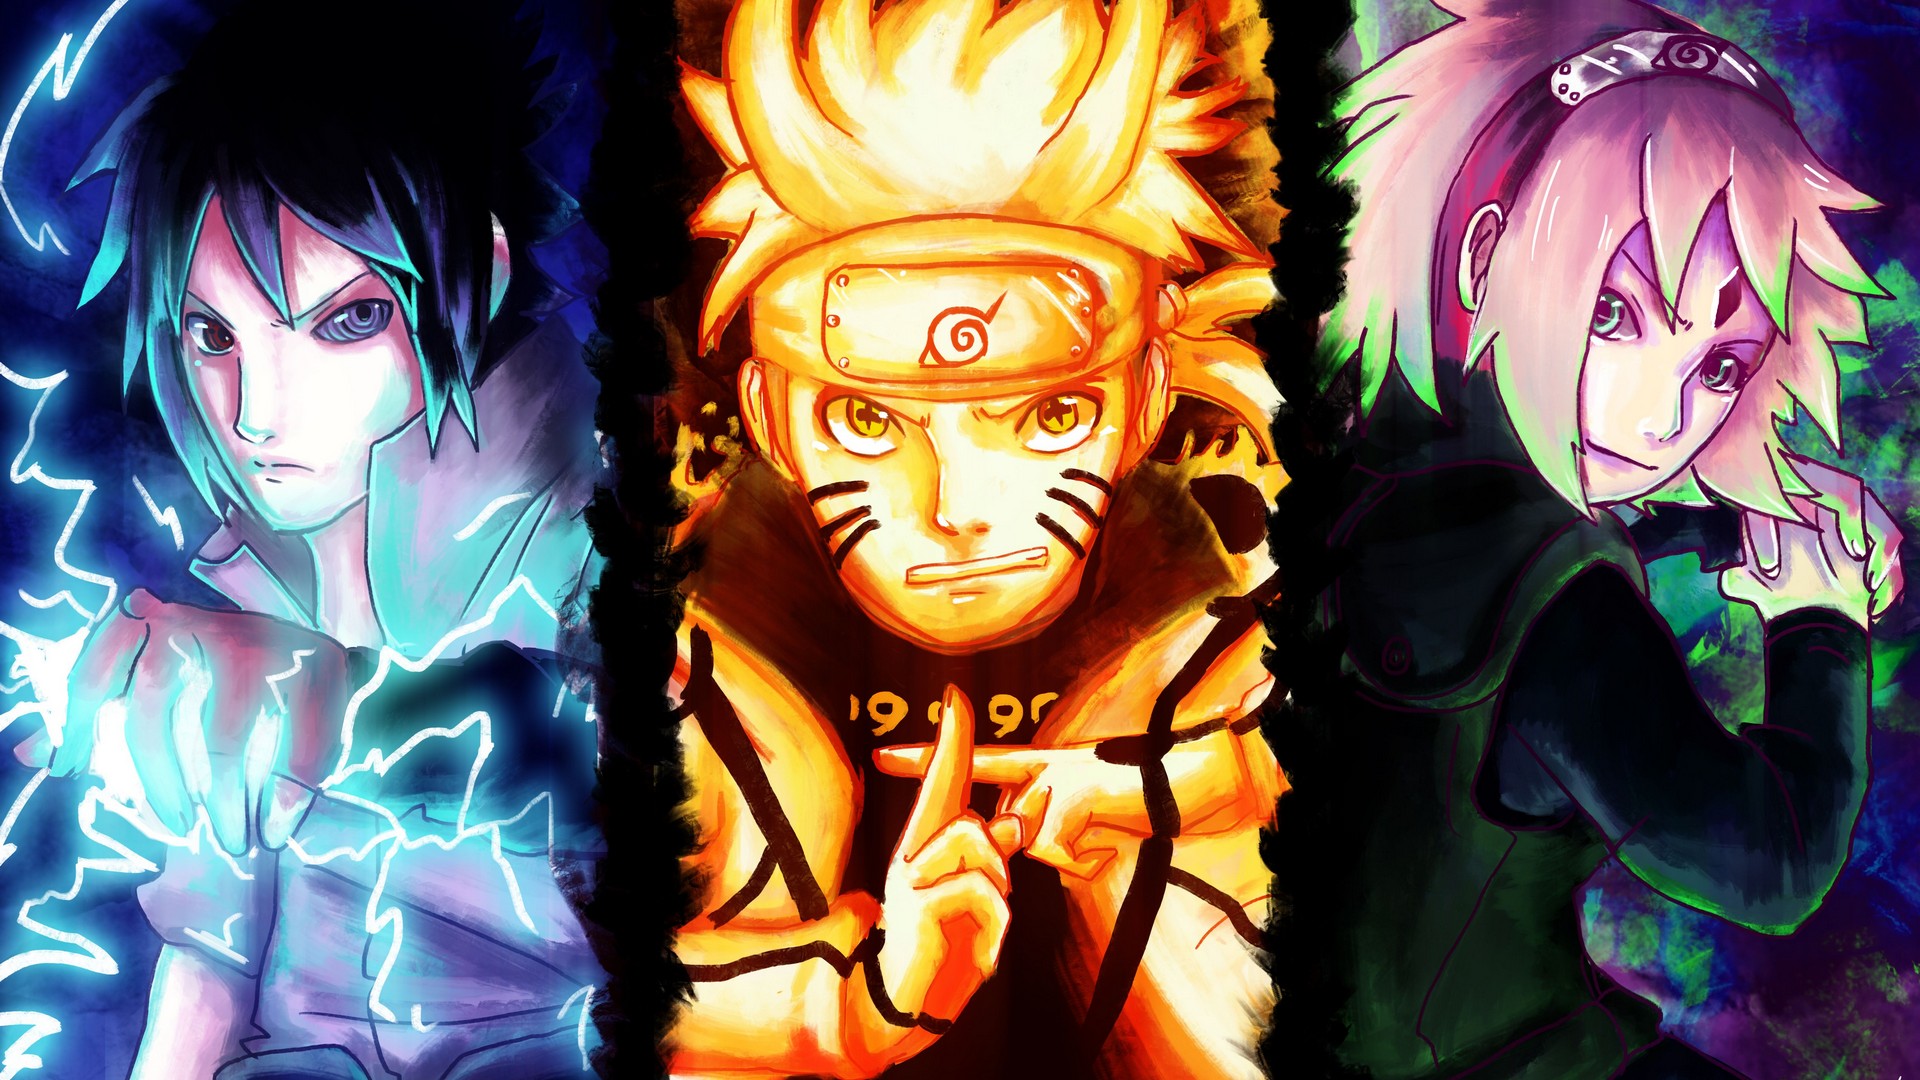 Naruto Full Movie Wallpaper with high-resolution 1920x1080 pixel. You can use this poster wallpaper for your Desktop Computers, Mac Screensavers, Windows Backgrounds, iPhone Wallpapers, Tablet or Android Lock screen and another Mobile device